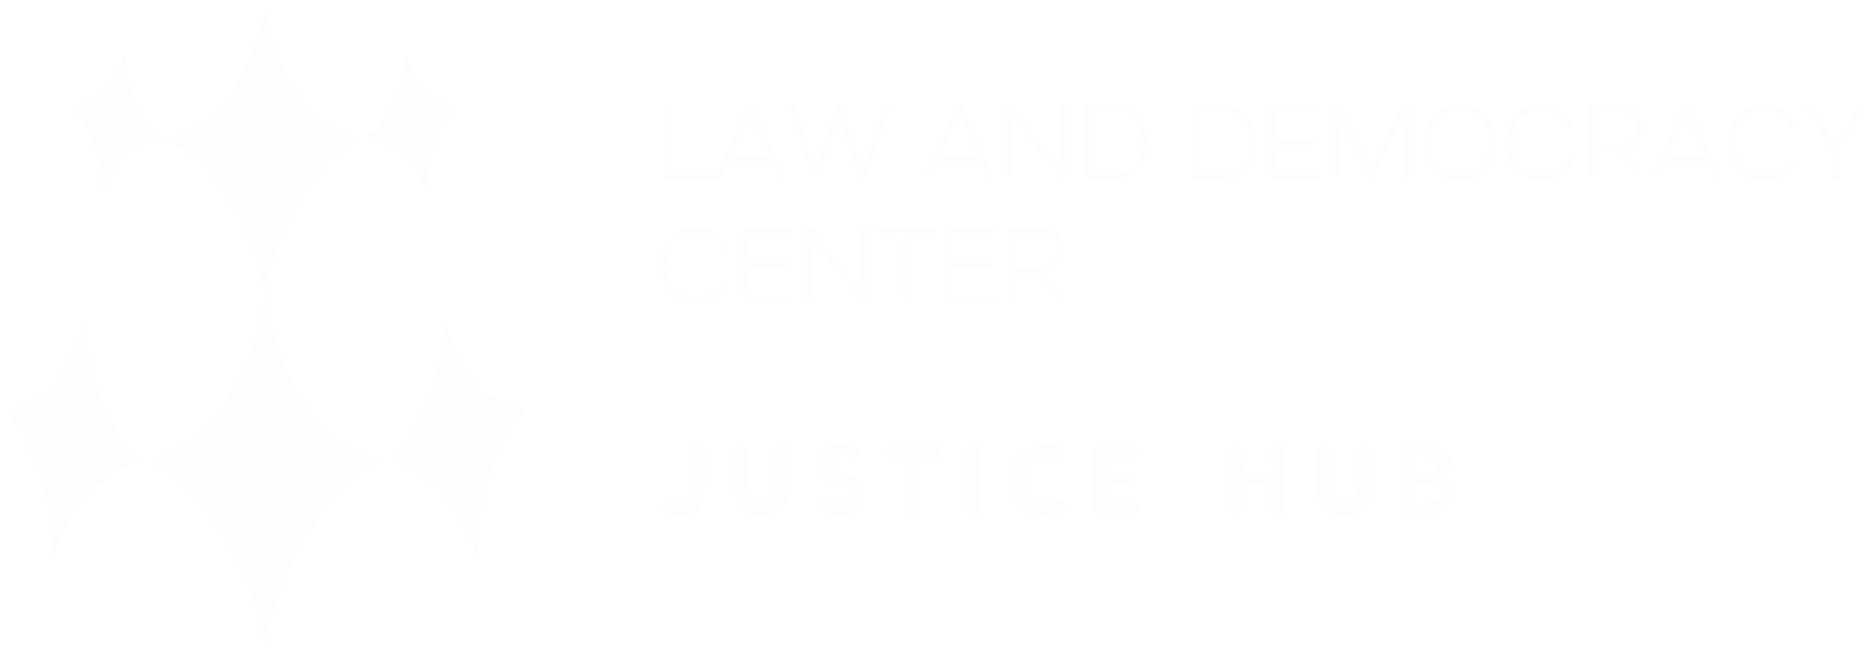 Justice Hub ⬩ Law and Democracy Center